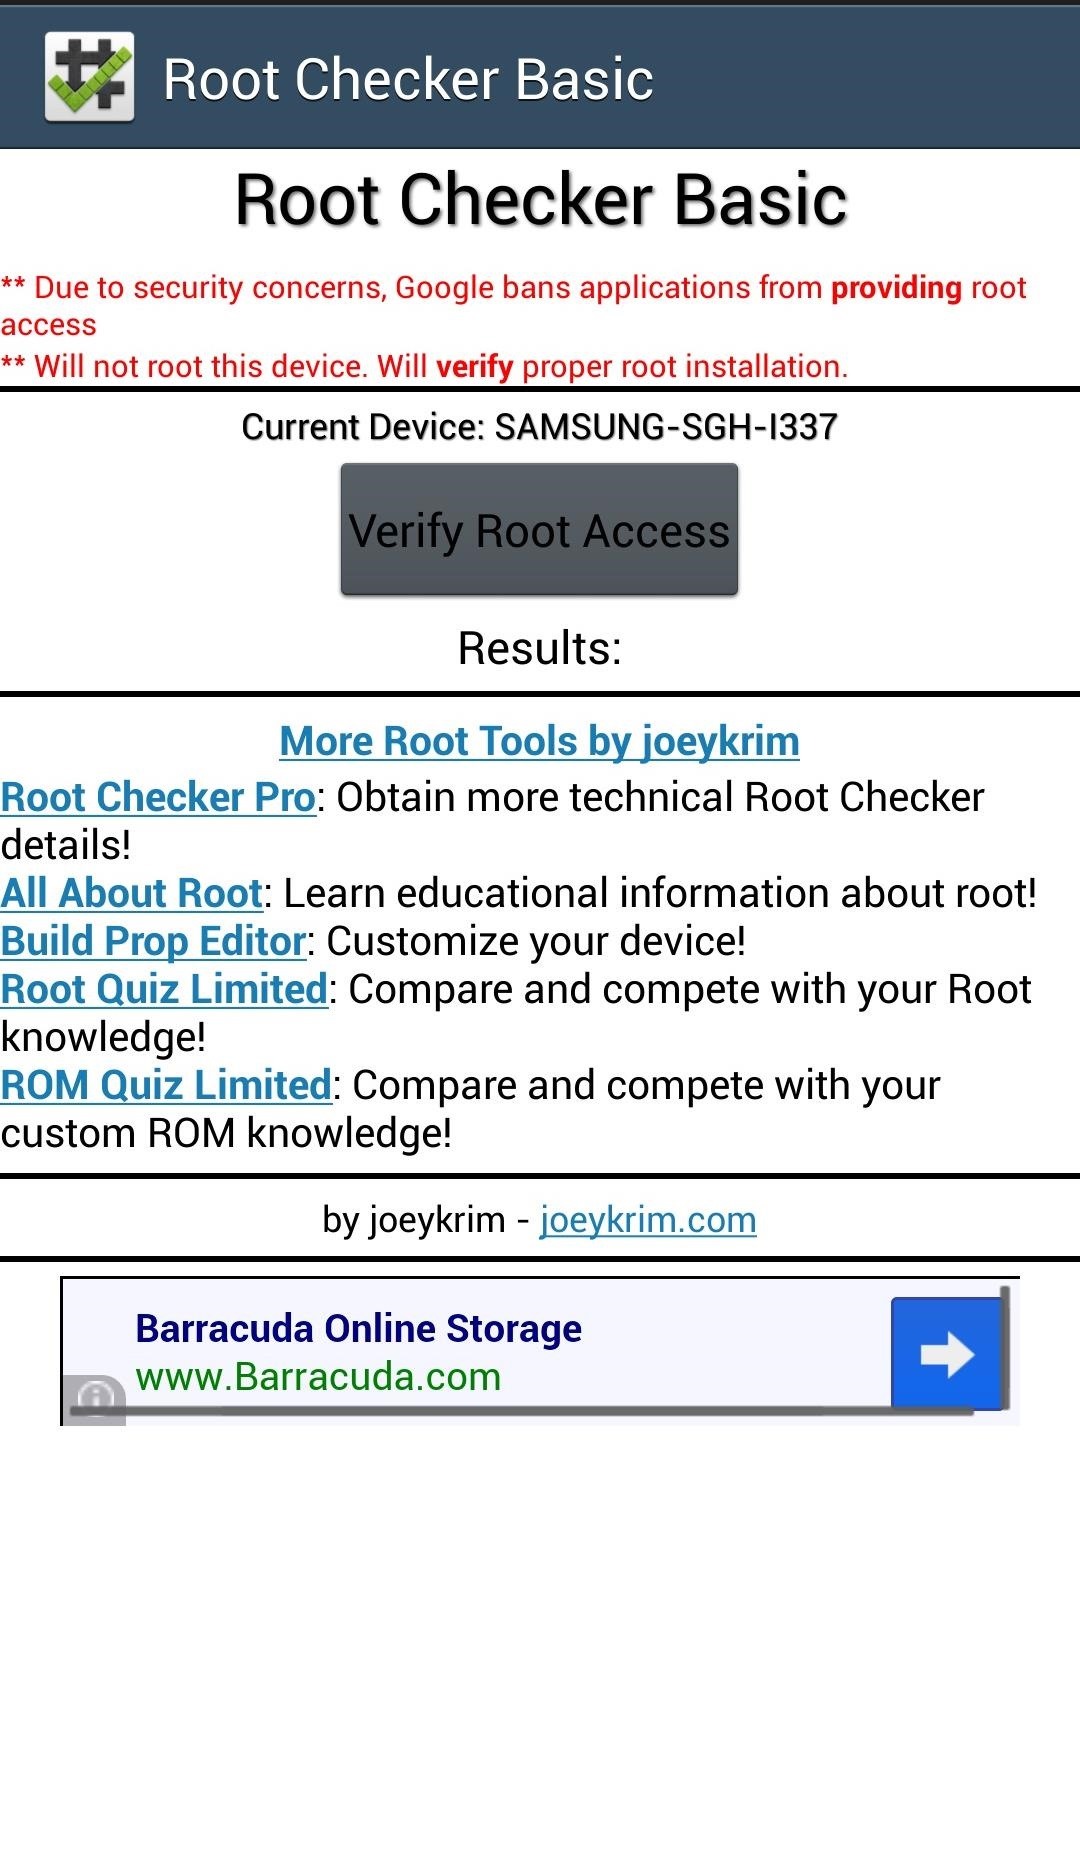 How to Root Your AT&T Samsung Galaxy S4 (MF3 Firmware)